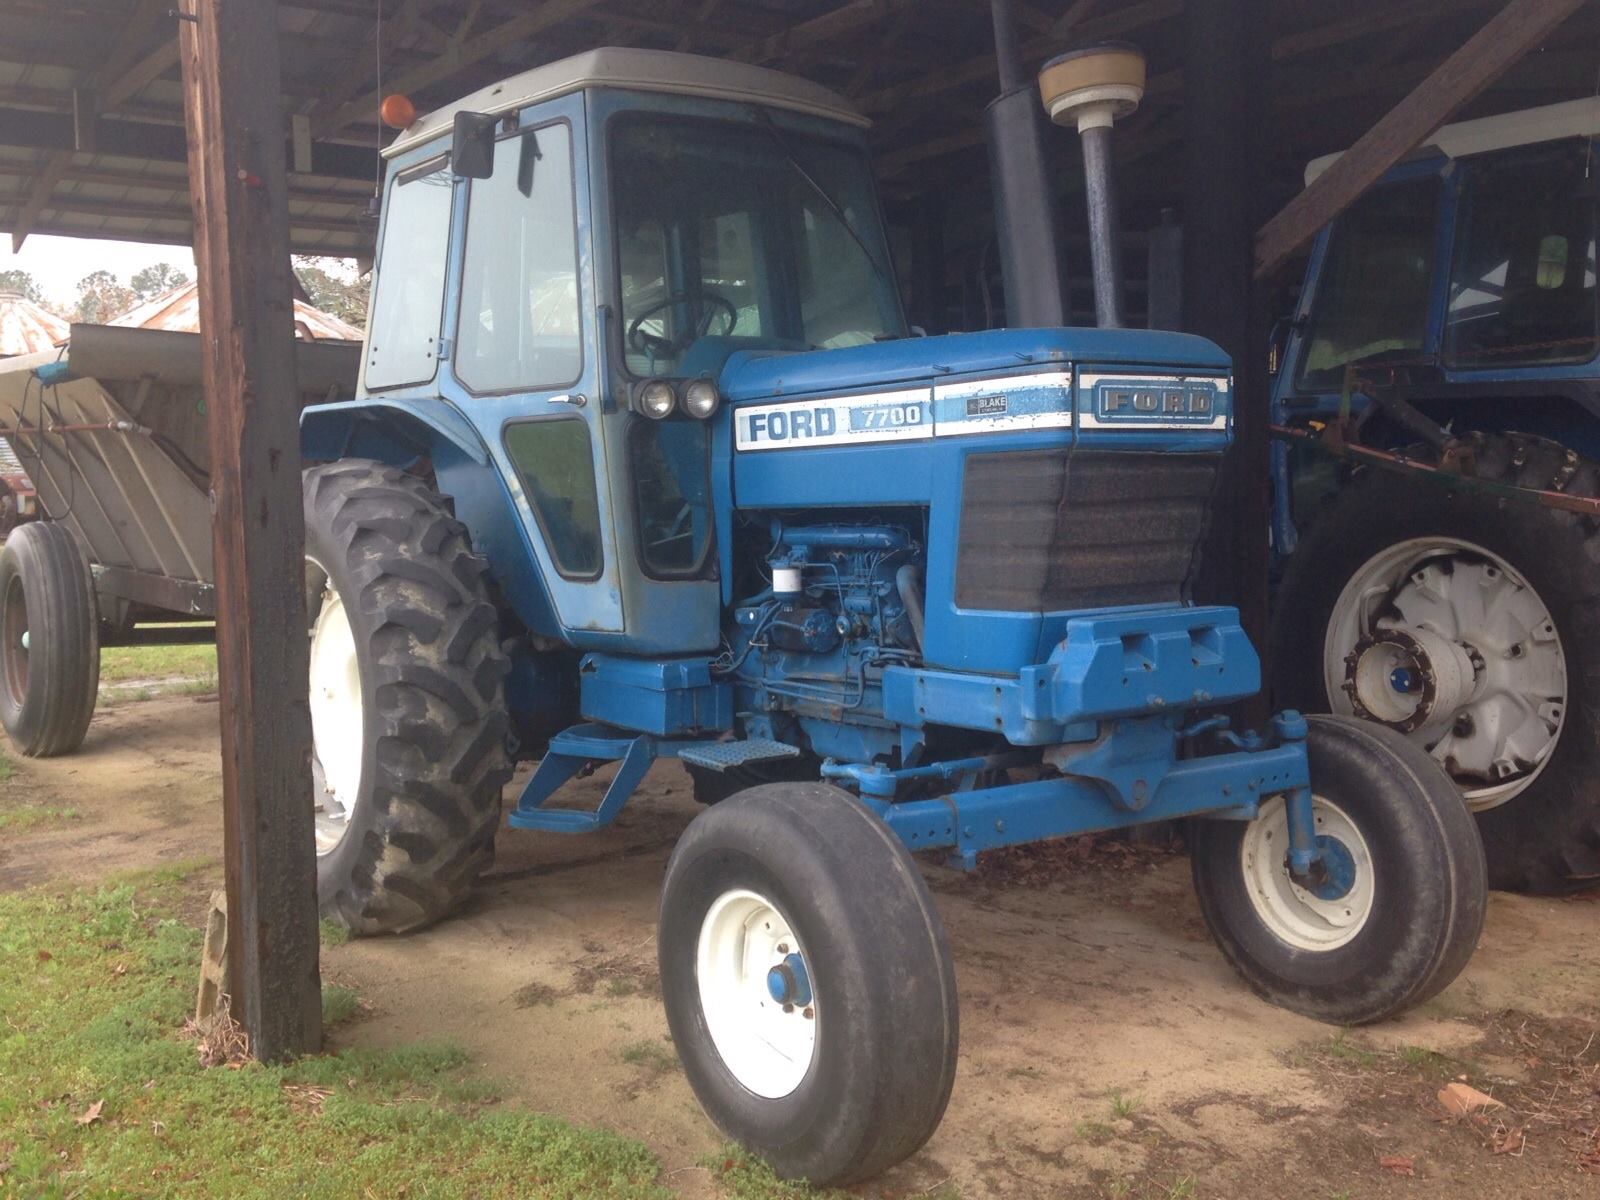 Pete’s Pick of the Week: Ford 7700 Tractor - News | Agweb.com